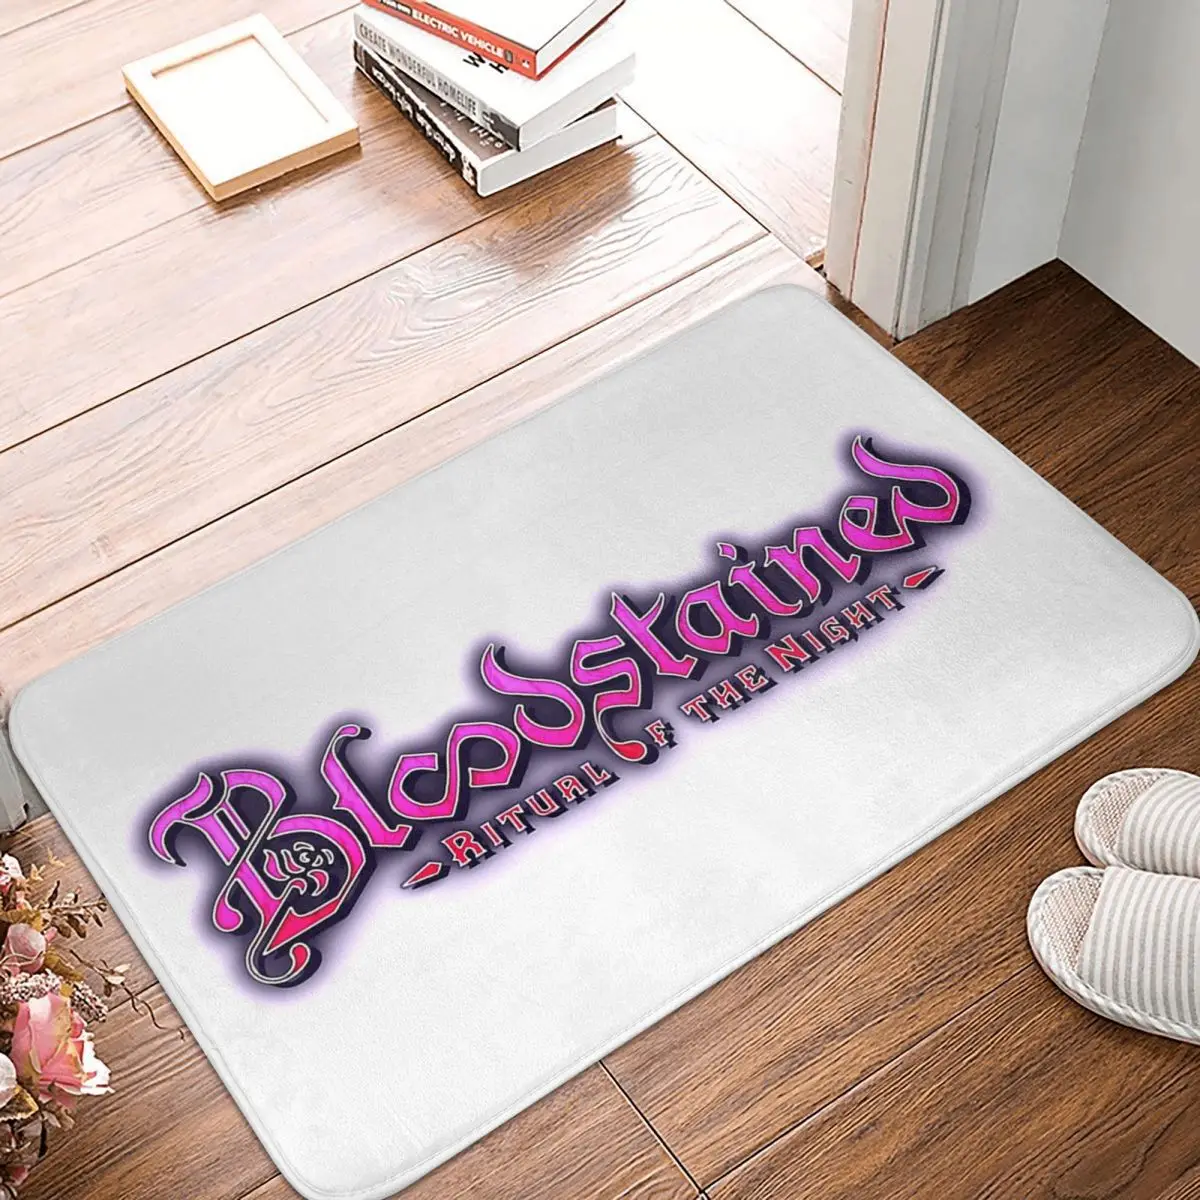 

Bloodstained Kitchen Non-Slip Carpet Bloodstained Ritual of the Bedroom Mat Welcome Doormat Home Decor Rug